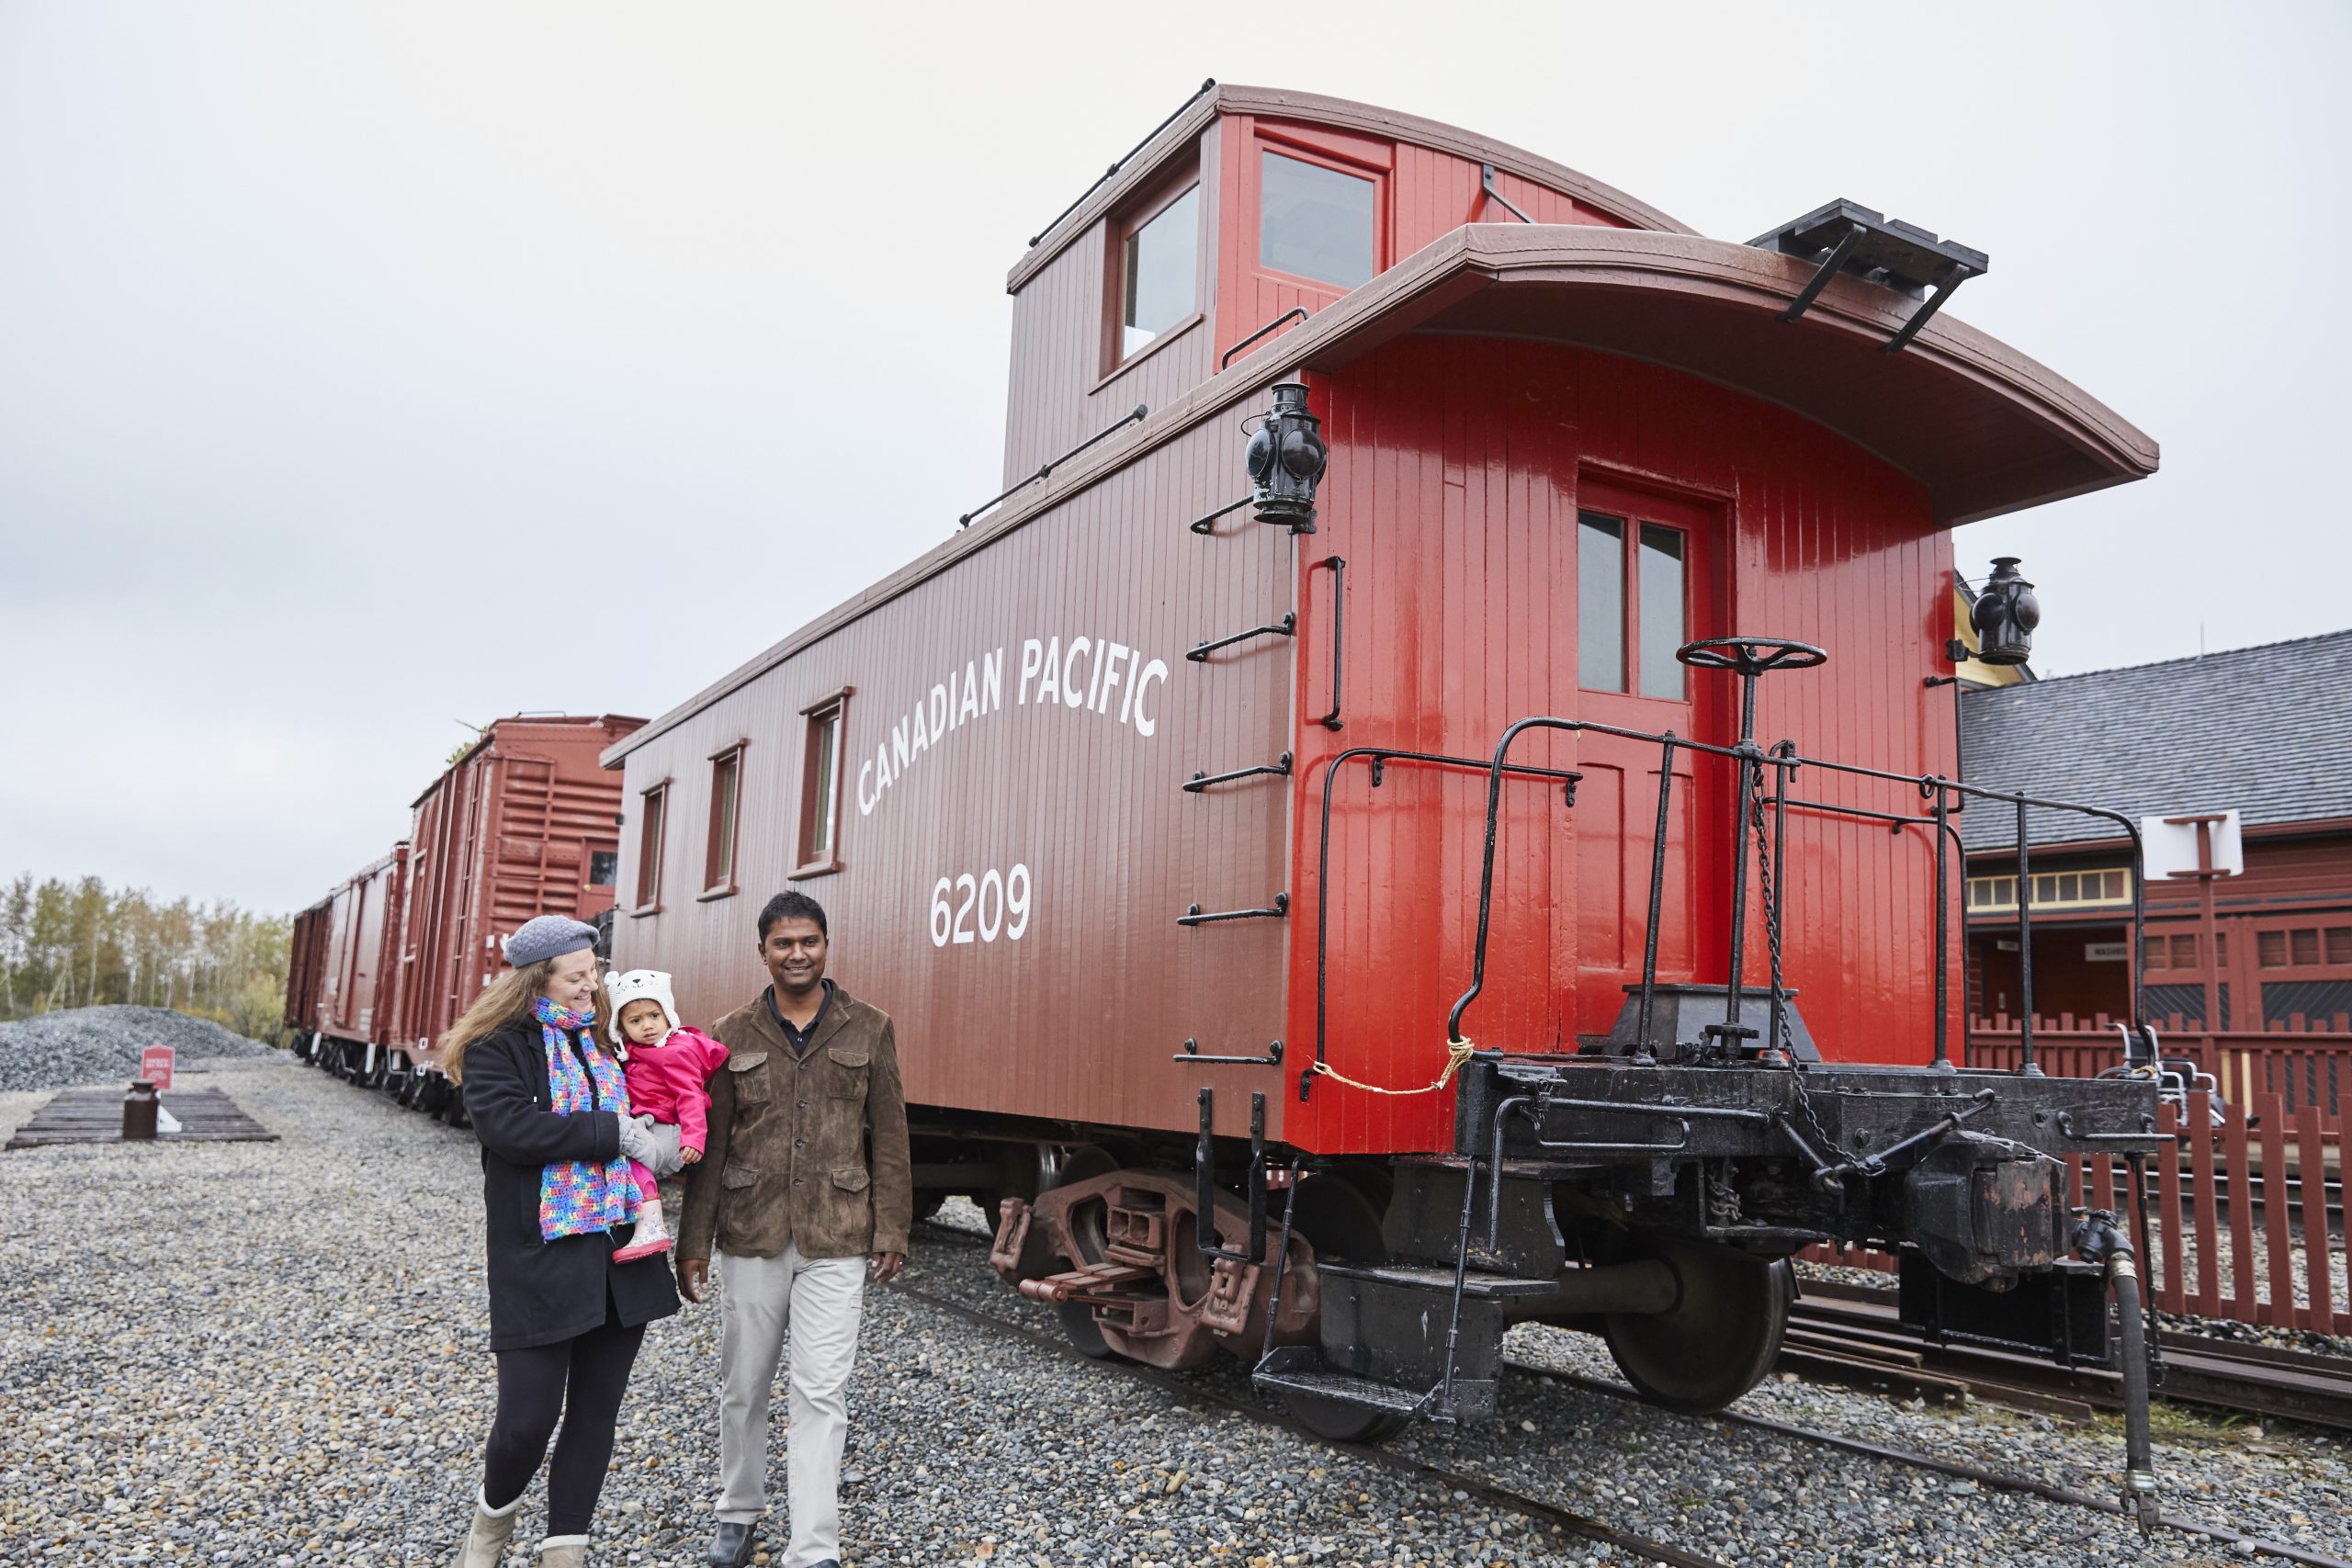 A family walking past CPR Caboose #6209 at Heritage Park